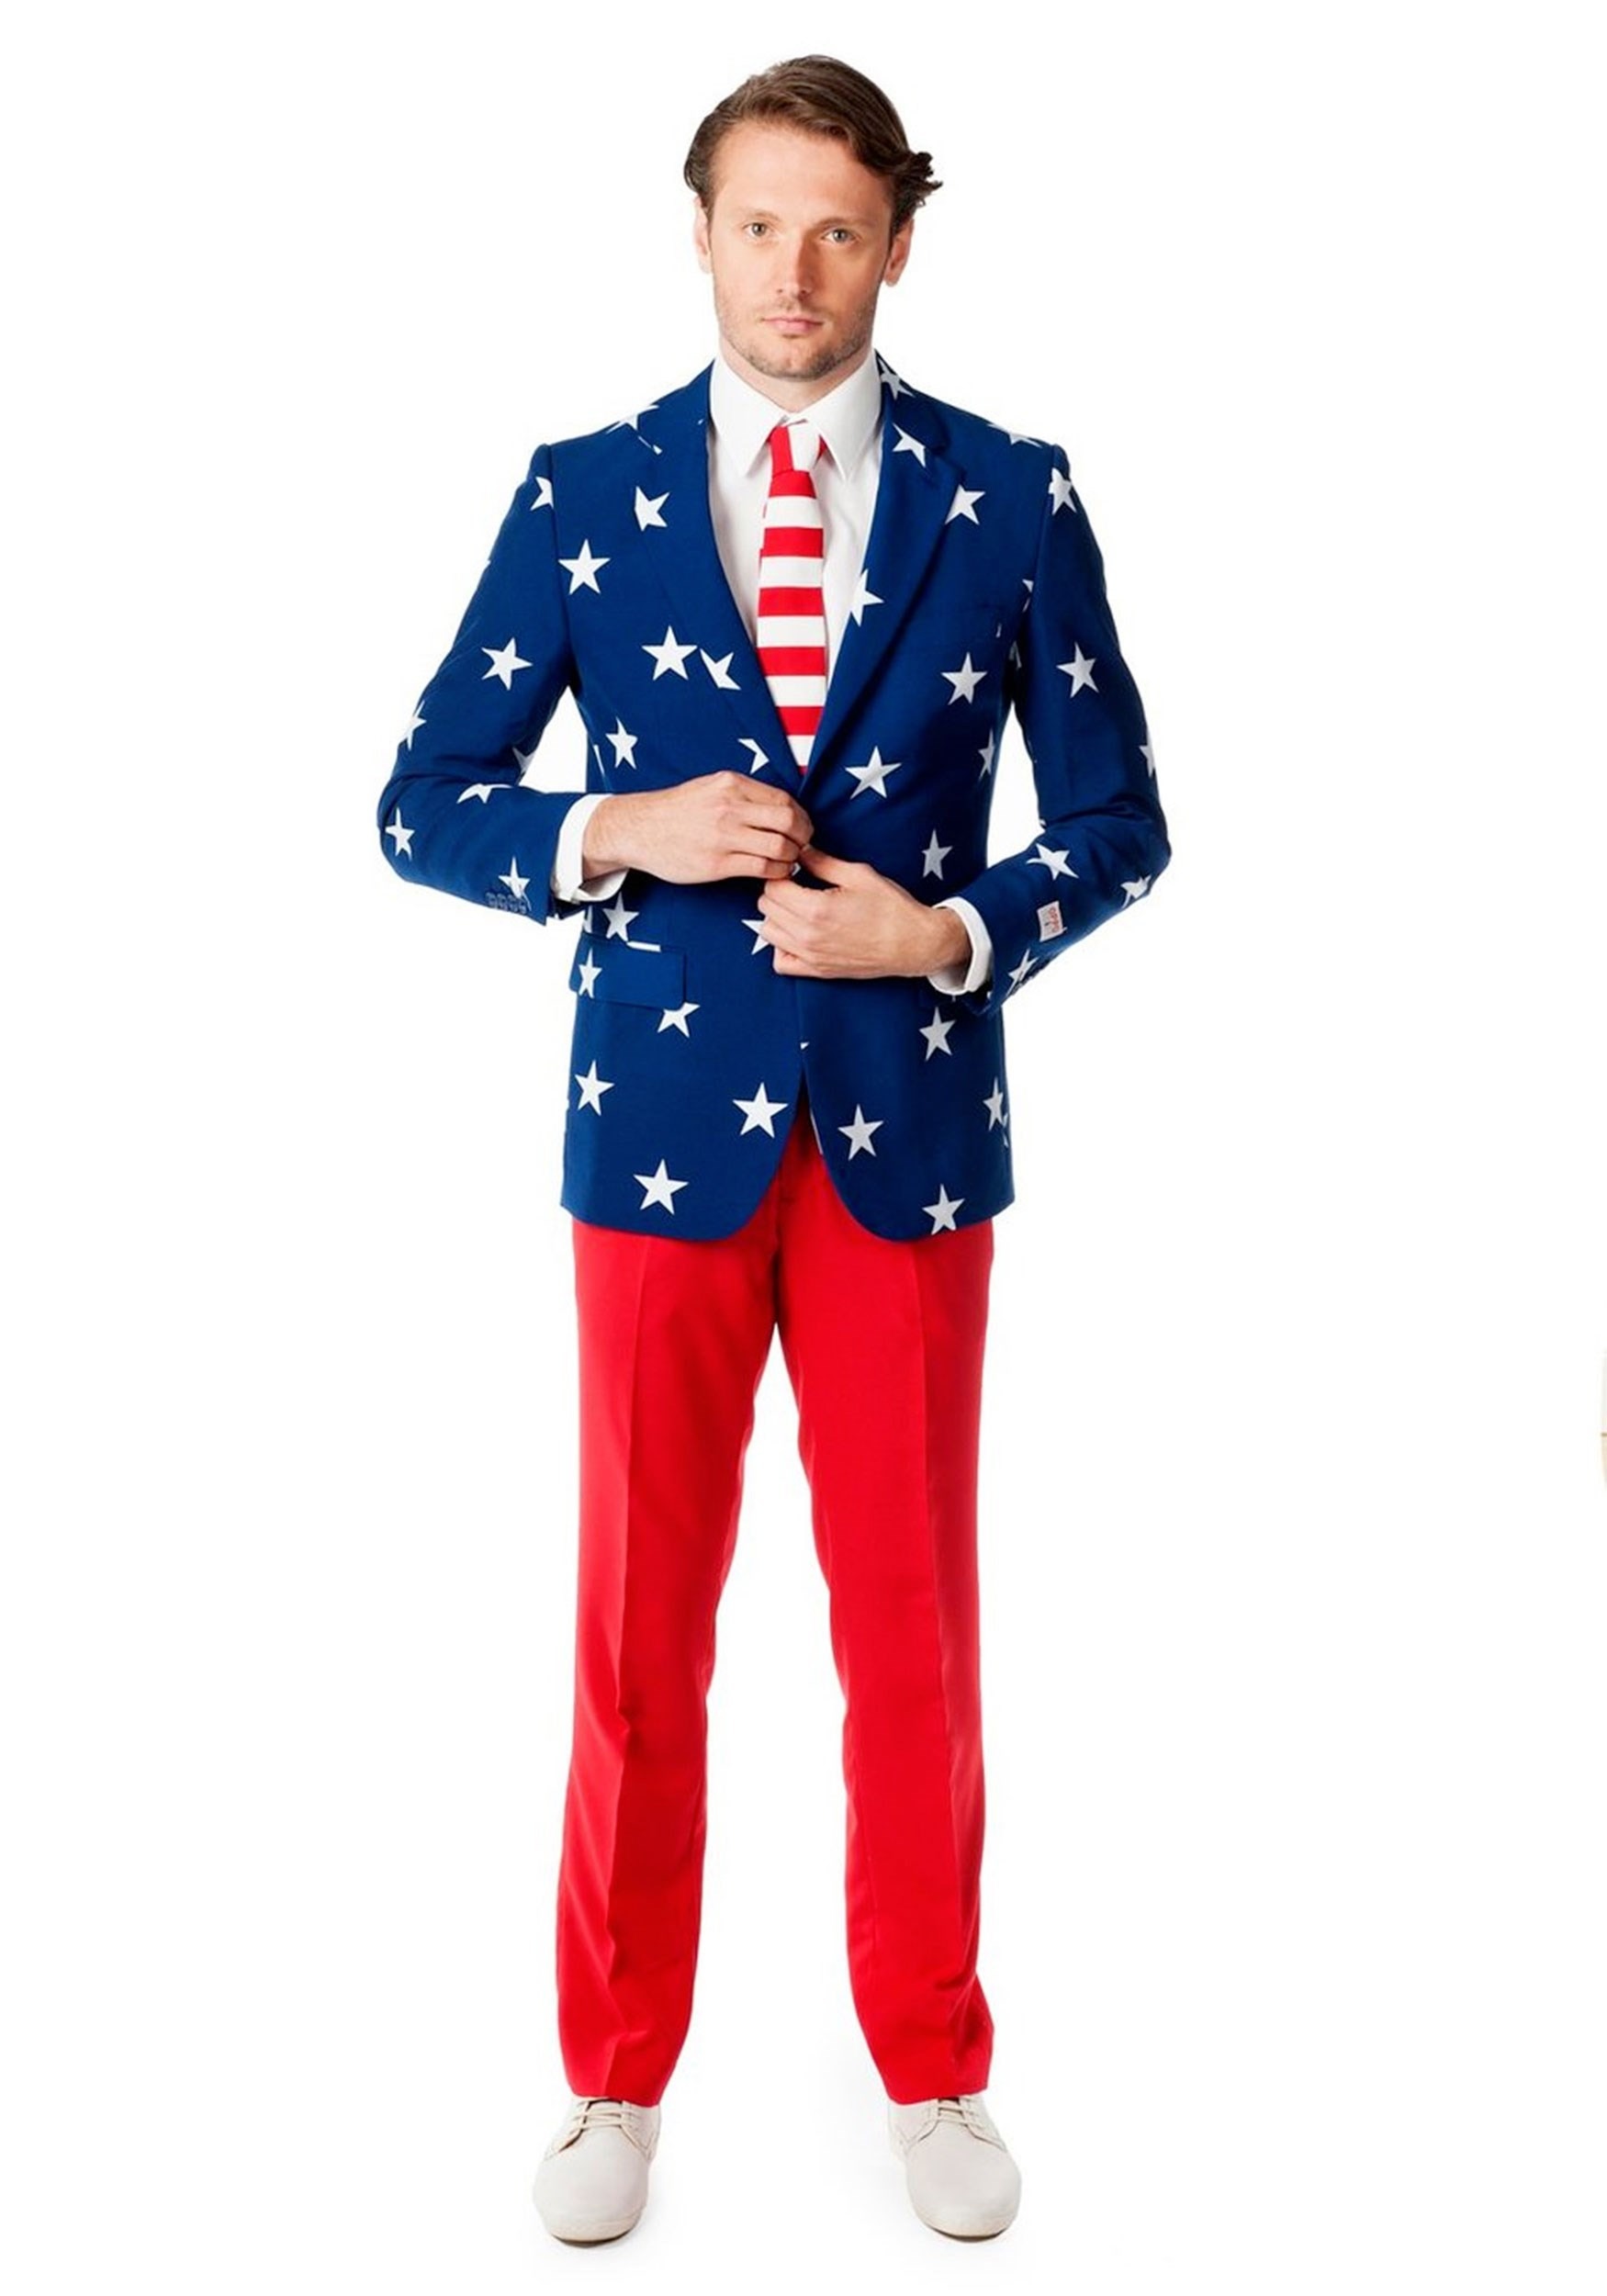 Image of OppoSuits Stars and Stripes Men's Costume Suit ID OSOSUI0023-44